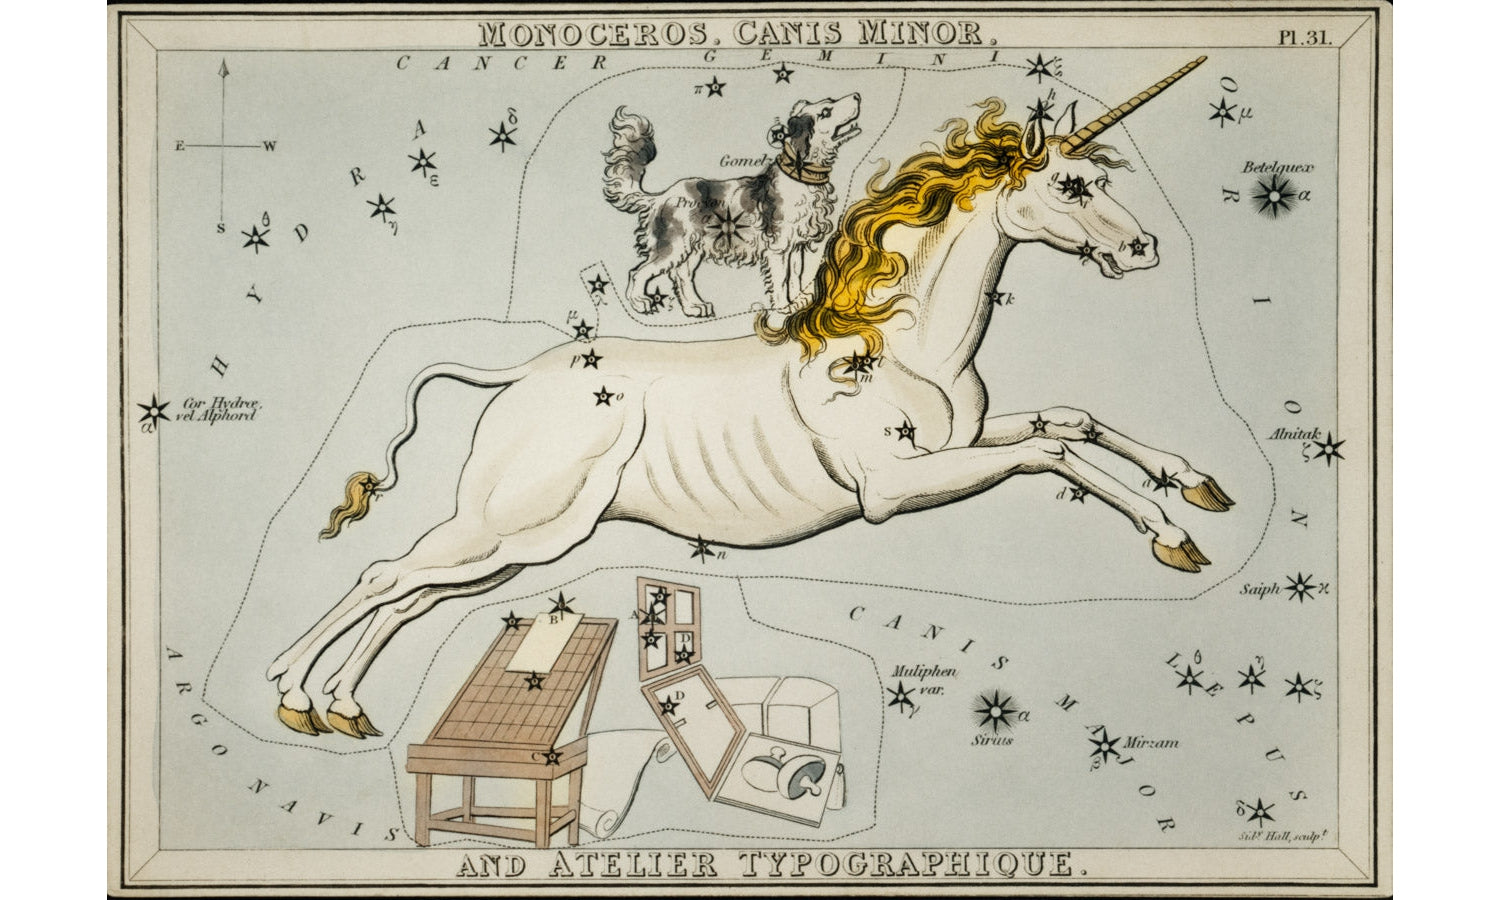 Sidney Hall’s (1831) astronomical chart illustration of the Monoceros, Canis Minor and the Atelier, poster PS290